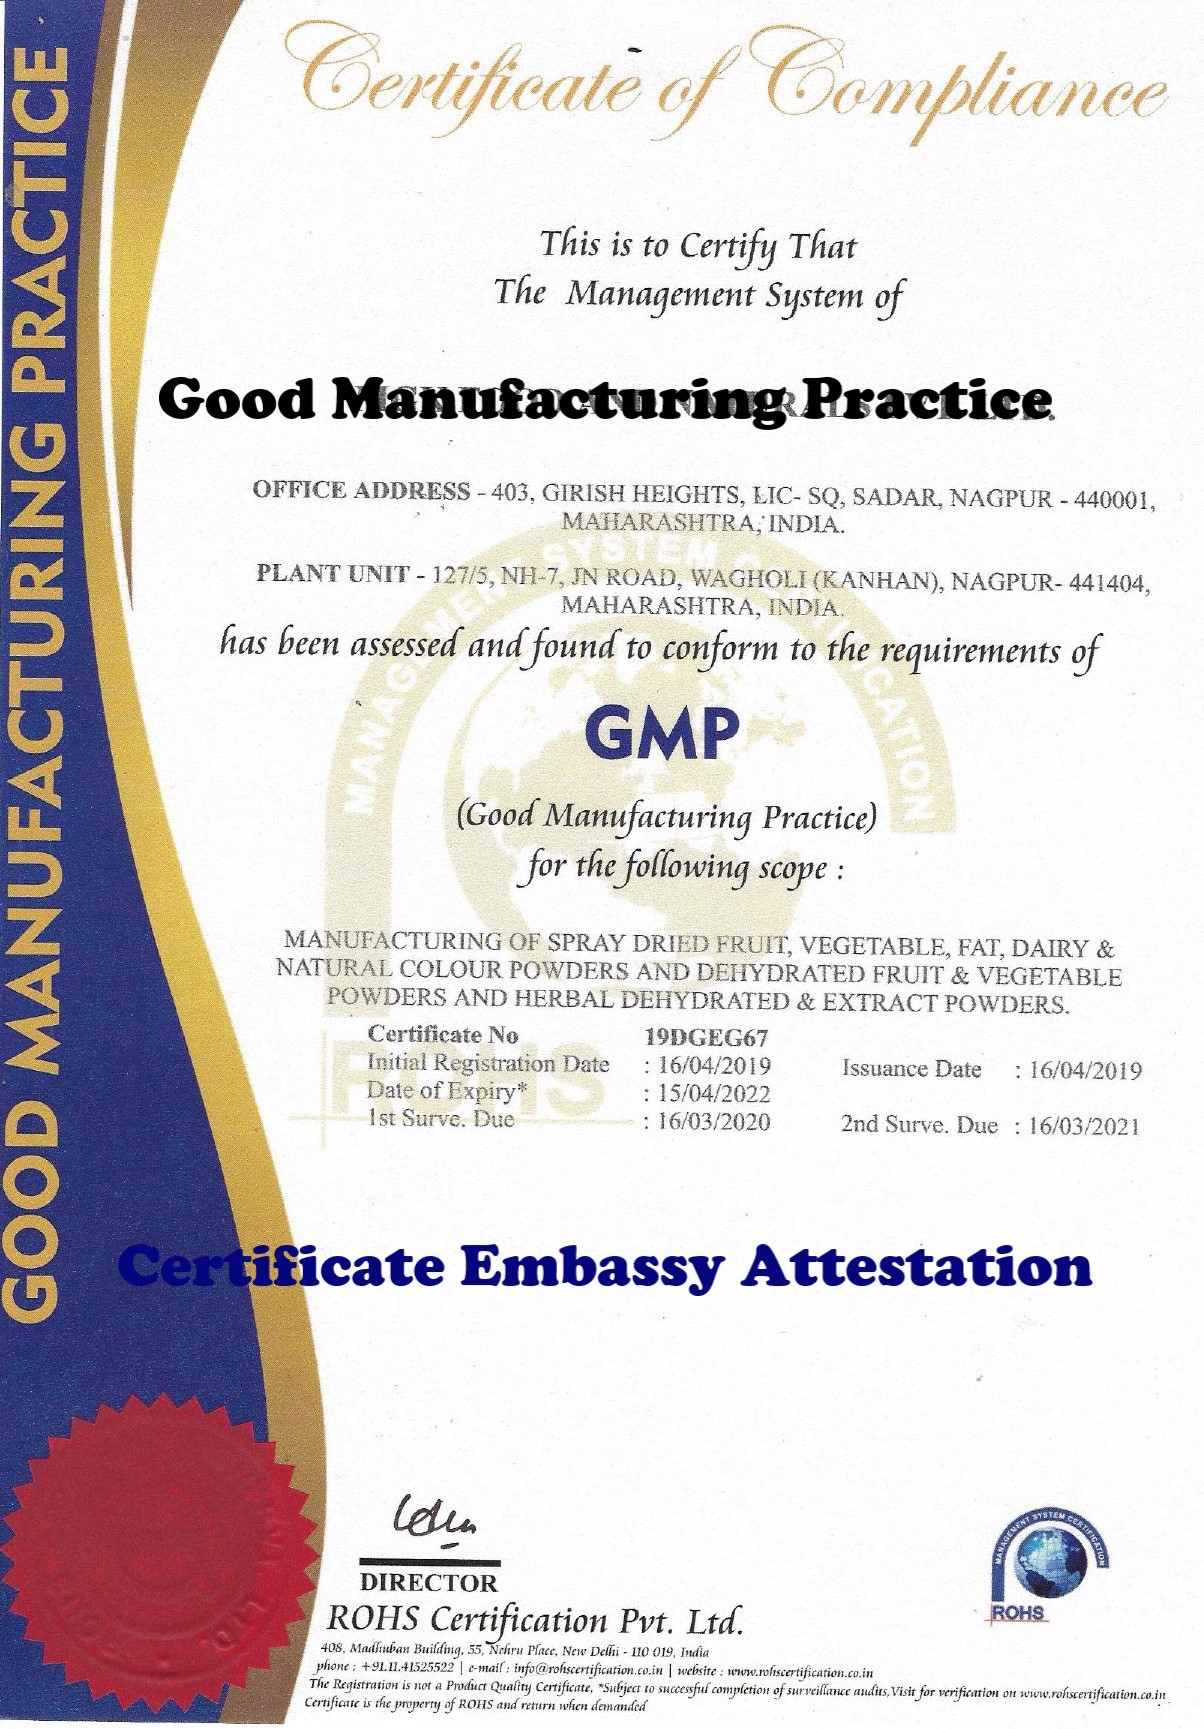 GMP Certificate Attestation from Liberia Embassy